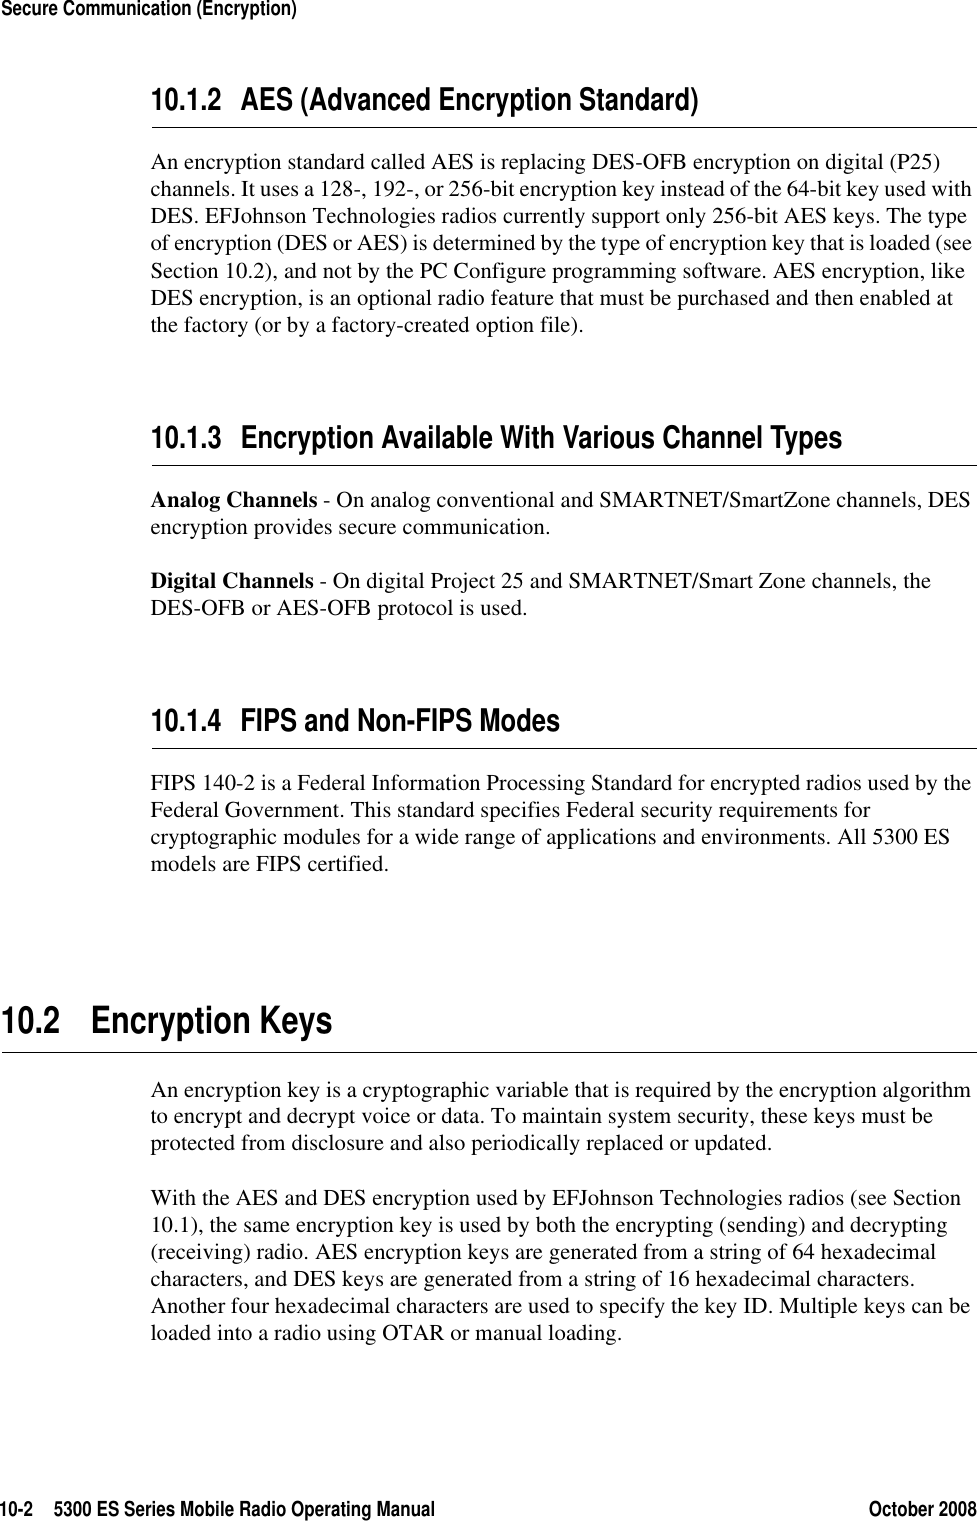 10-2 5300 ES Series Mobile Radio Operating Manual October 2008Secure Communication (Encryption)10.1.2 AES (Advanced Encryption Standard)An encryption standard called AES is replacing DES-OFB encryption on digital (P25) channels. It uses a 128-, 192-, or 256-bit encryption key instead of the 64-bit key used with DES. EFJohnson Technologies radios currently support only 256-bit AES keys. The type of encryption (DES or AES) is determined by the type of encryption key that is loaded (see Section 10.2), and not by the PC Configure programming software. AES encryption, like DES encryption, is an optional radio feature that must be purchased and then enabled at the factory (or by a factory-created option file).10.1.3 Encryption Available With Various Channel TypesAnalog Channels - On analog conventional and SMARTNET/SmartZone channels, DES encryption provides secure communication.Digital Channels - On digital Project 25 and SMARTNET/Smart Zone channels, the DES-OFB or AES-OFB protocol is used.10.1.4 FIPS and Non-FIPS ModesFIPS 140-2 is a Federal Information Processing Standard for encrypted radios used by the Federal Government. This standard specifies Federal security requirements for cryptographic modules for a wide range of applications and environments. All 5300 ES models are FIPS certified.10.2 Encryption KeysAn encryption key is a cryptographic variable that is required by the encryption algorithm to encrypt and decrypt voice or data. To maintain system security, these keys must be protected from disclosure and also periodically replaced or updated.With the AES and DES encryption used by EFJohnson Technologies radios (see Section 10.1), the same encryption key is used by both the encrypting (sending) and decrypting (receiving) radio. AES encryption keys are generated from a string of 64 hexadecimal characters, and DES keys are generated from a string of 16 hexadecimal characters. Another four hexadecimal characters are used to specify the key ID. Multiple keys can be loaded into a radio using OTAR or manual loading.